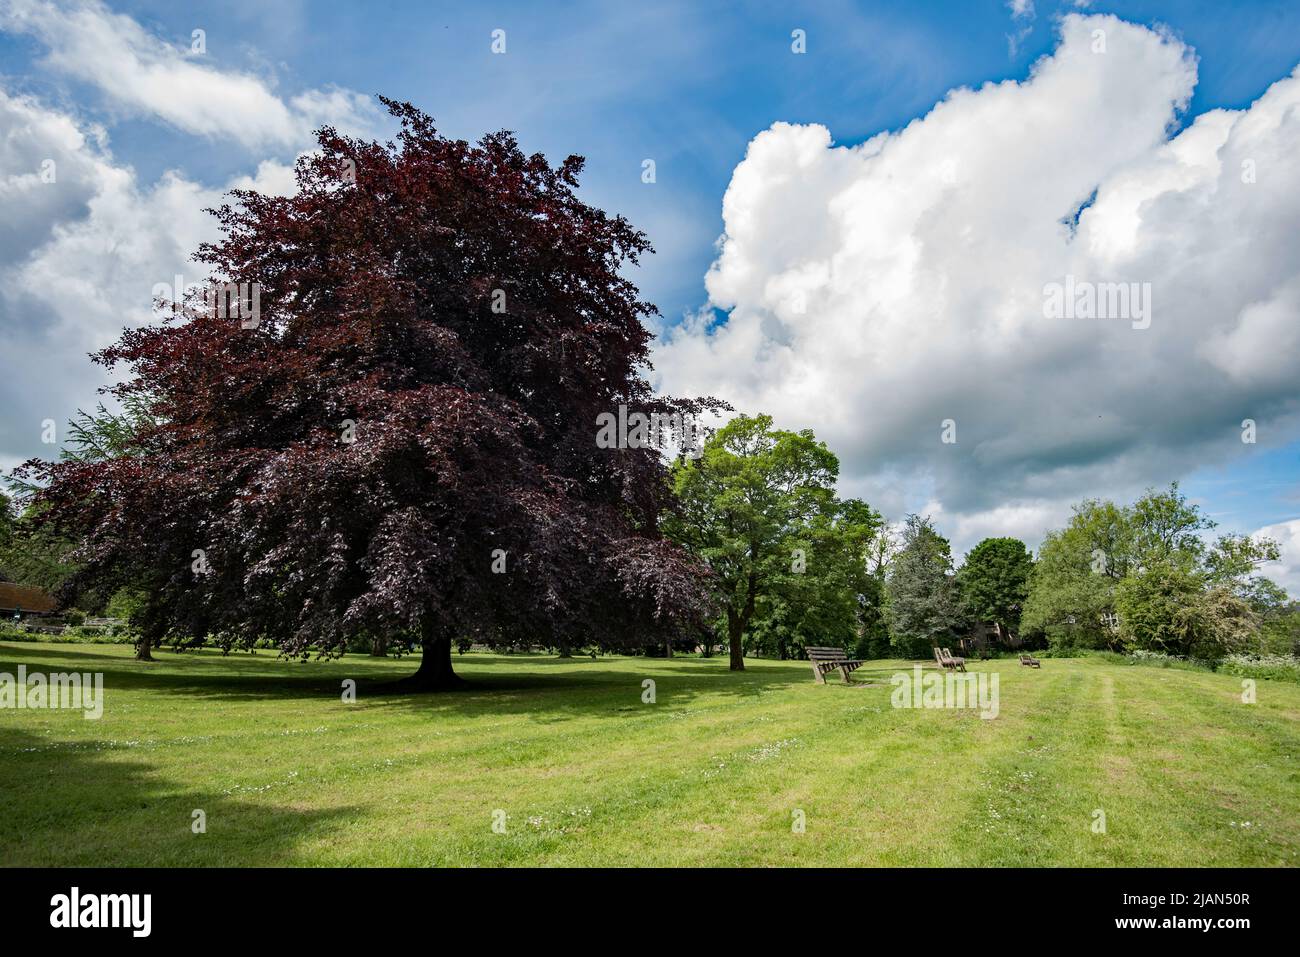 Specimen trees in a public access area of parkland alongside the River Aire in Gargrave. A wonderful place to rest up 1 minute from Pennine Way route. Stock Photo